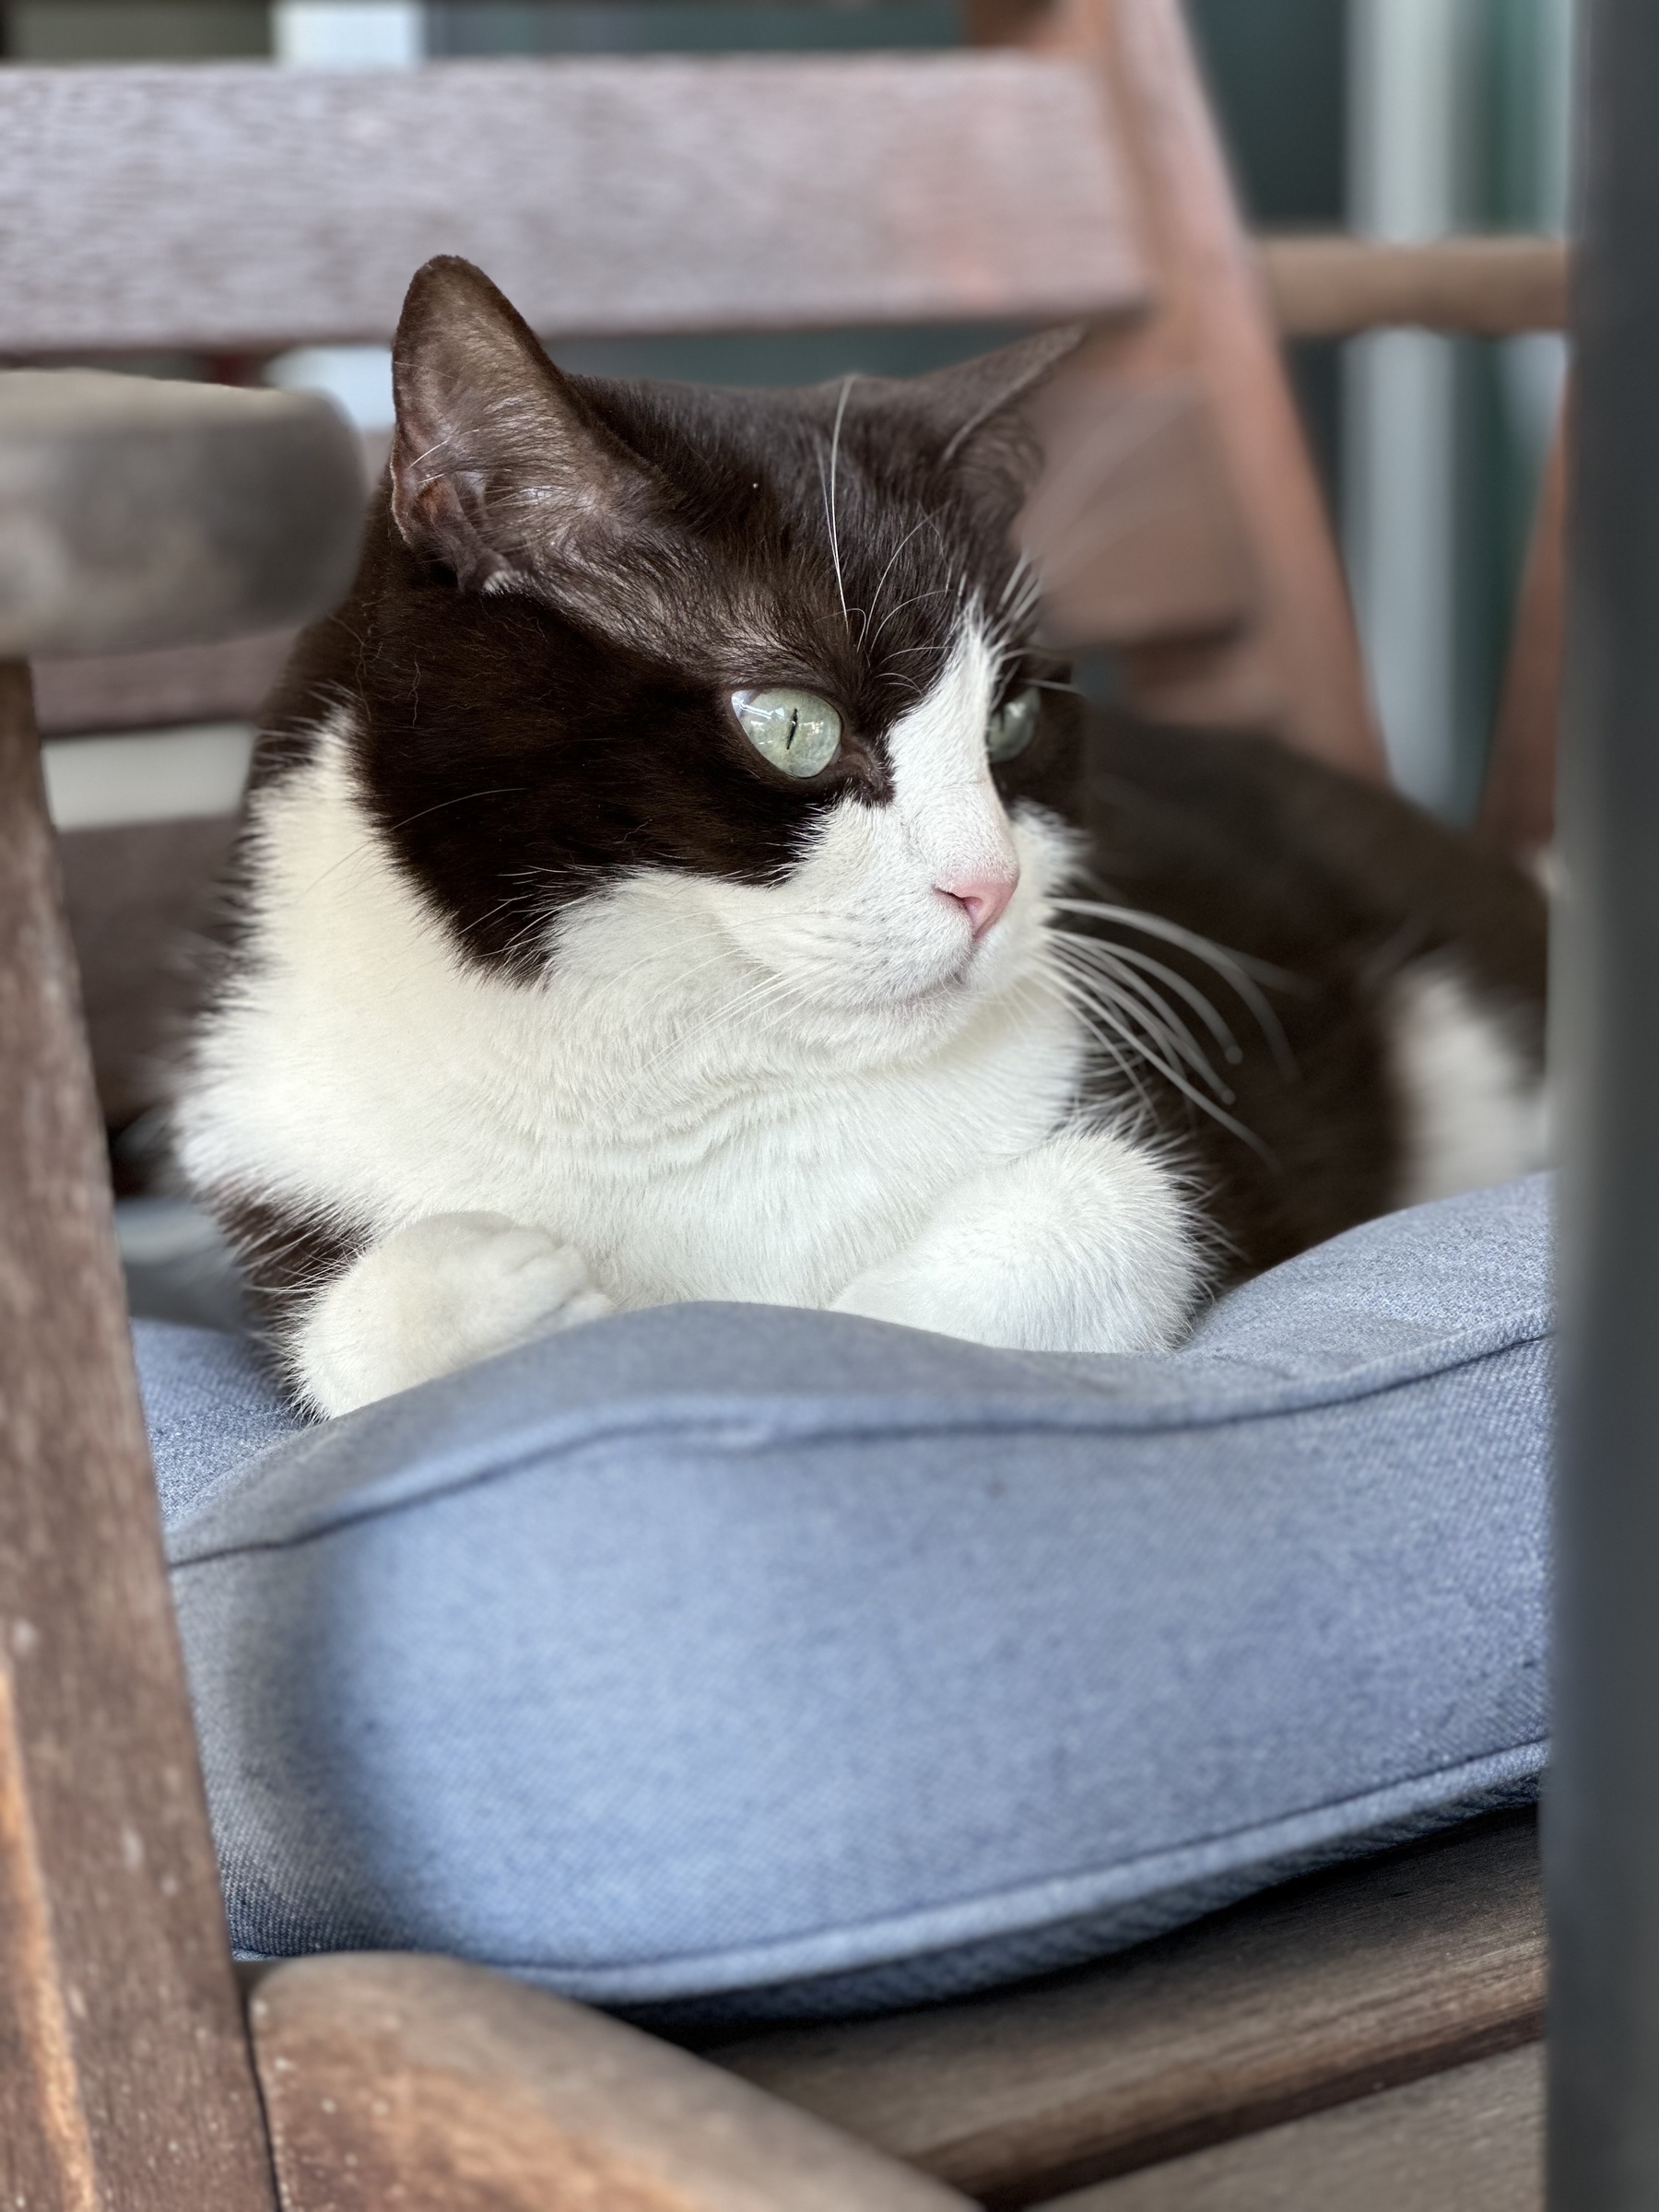 A black and white cat called Ali sitting on top of a blue cushion in an old wooden chair. Her front paws are tucked under her and she’s looking intently at something. Her head and body are black but her face, belly and paws are white.